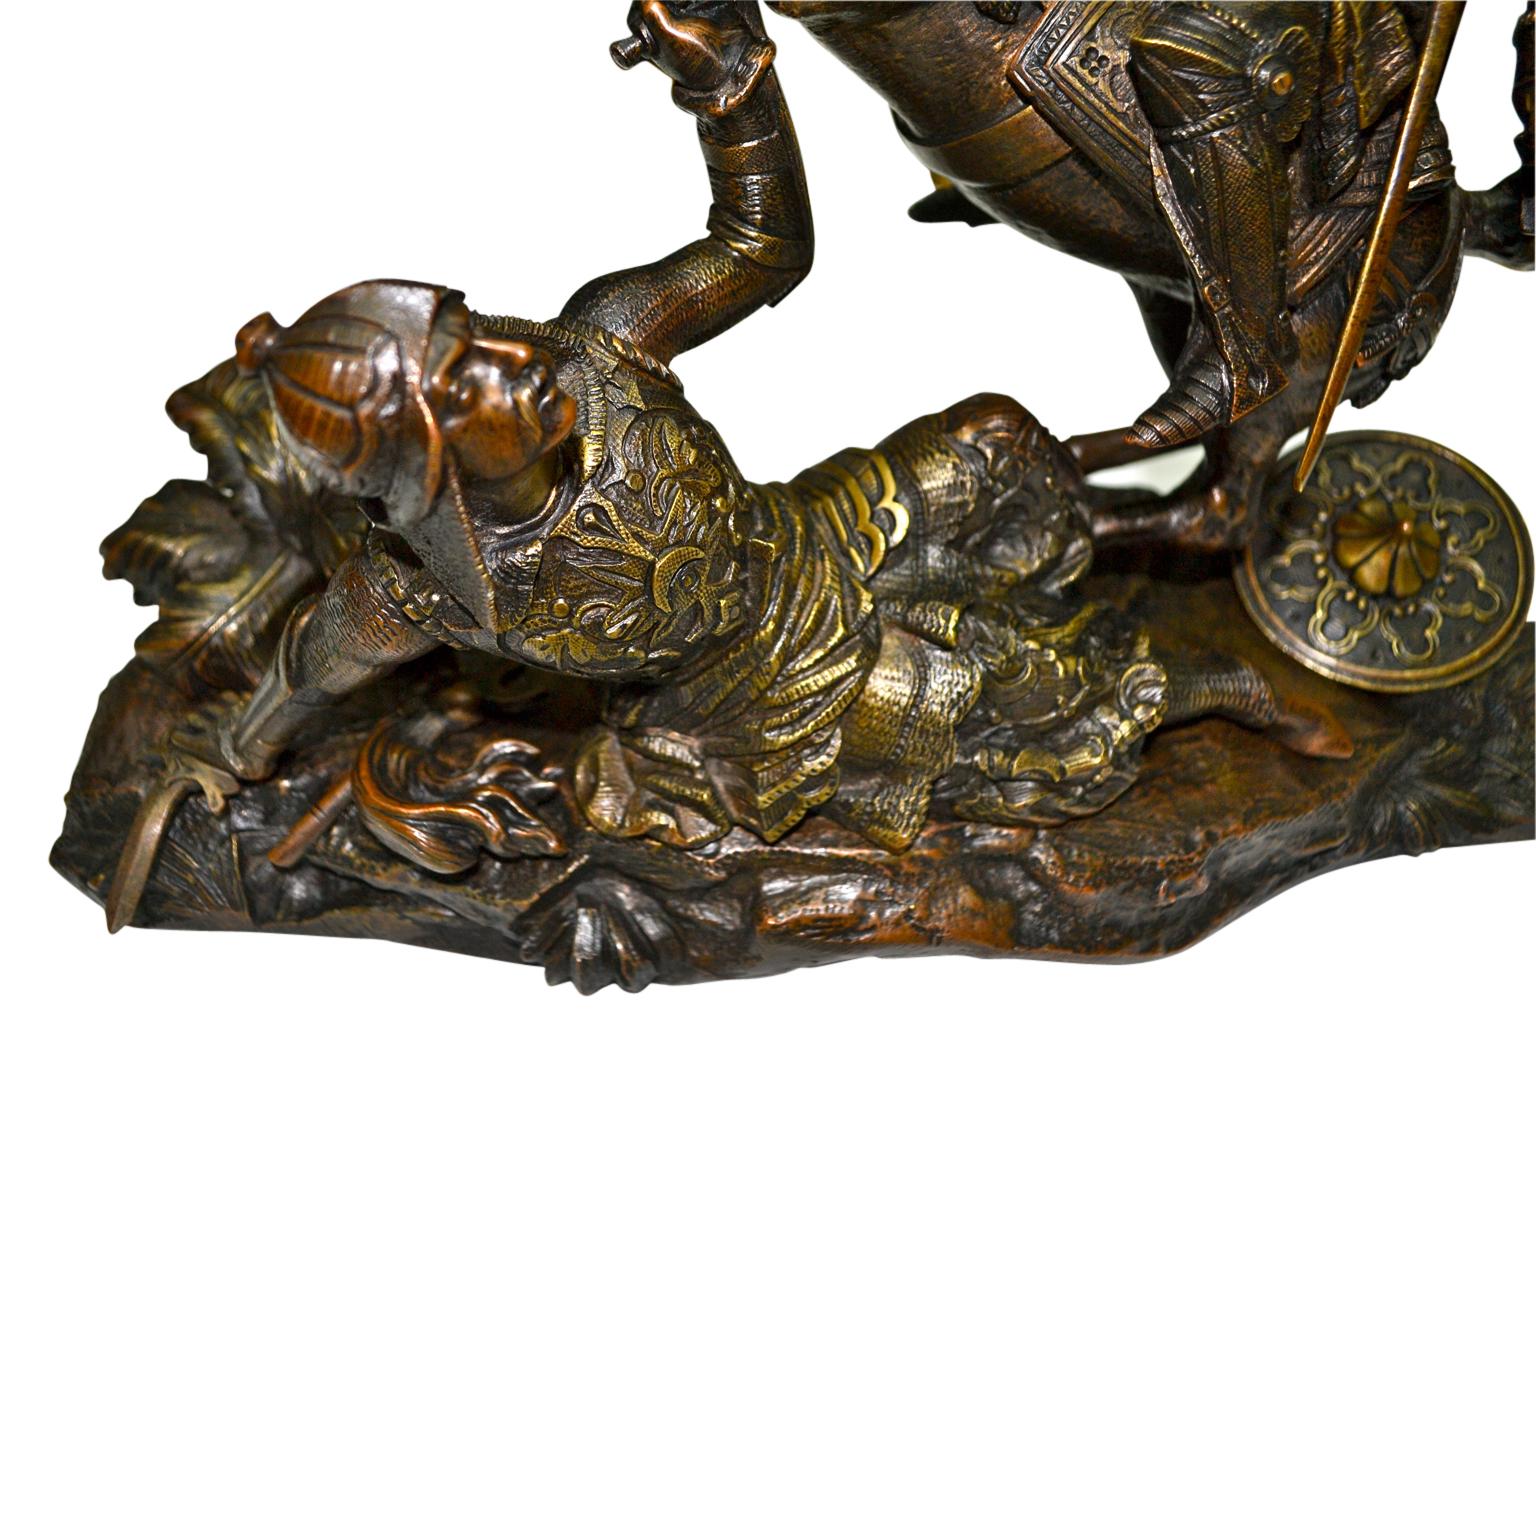 Renaissance Revival  Troubadour Bronze of the Combat of Charles Martel and the Ottoman King Abderame